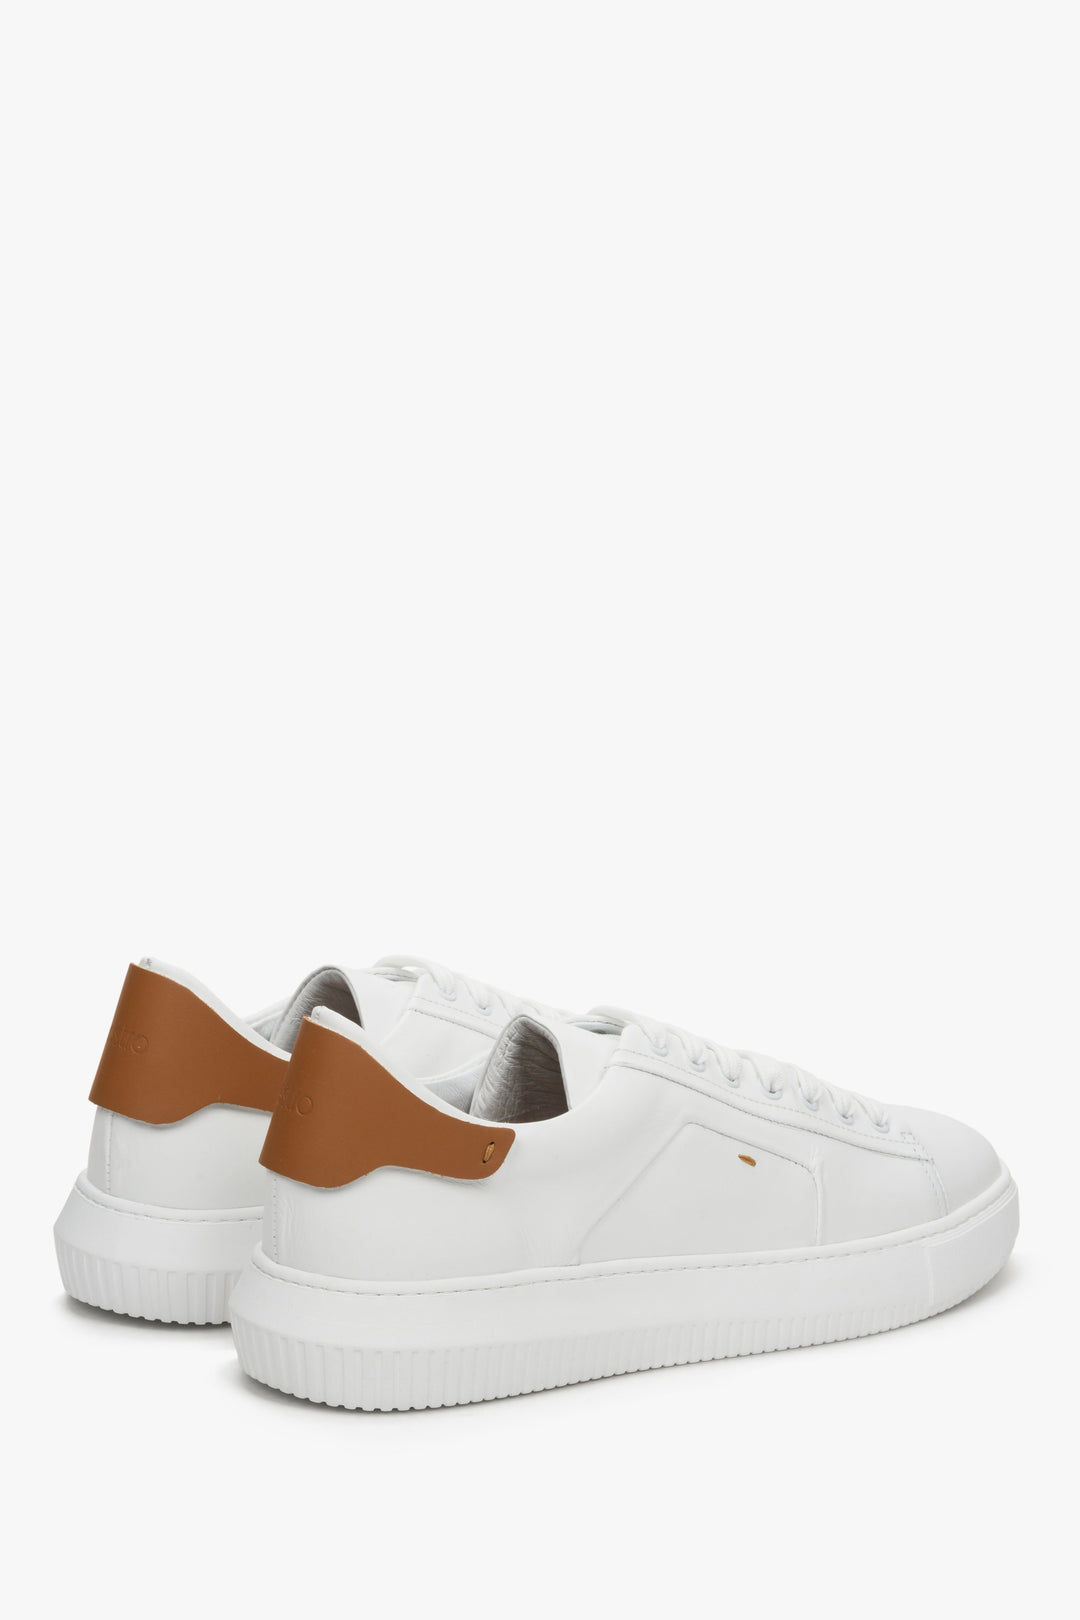 Men's white & brown leather sneakers for spring and fall - prezentation of the shoe side and heel counter.